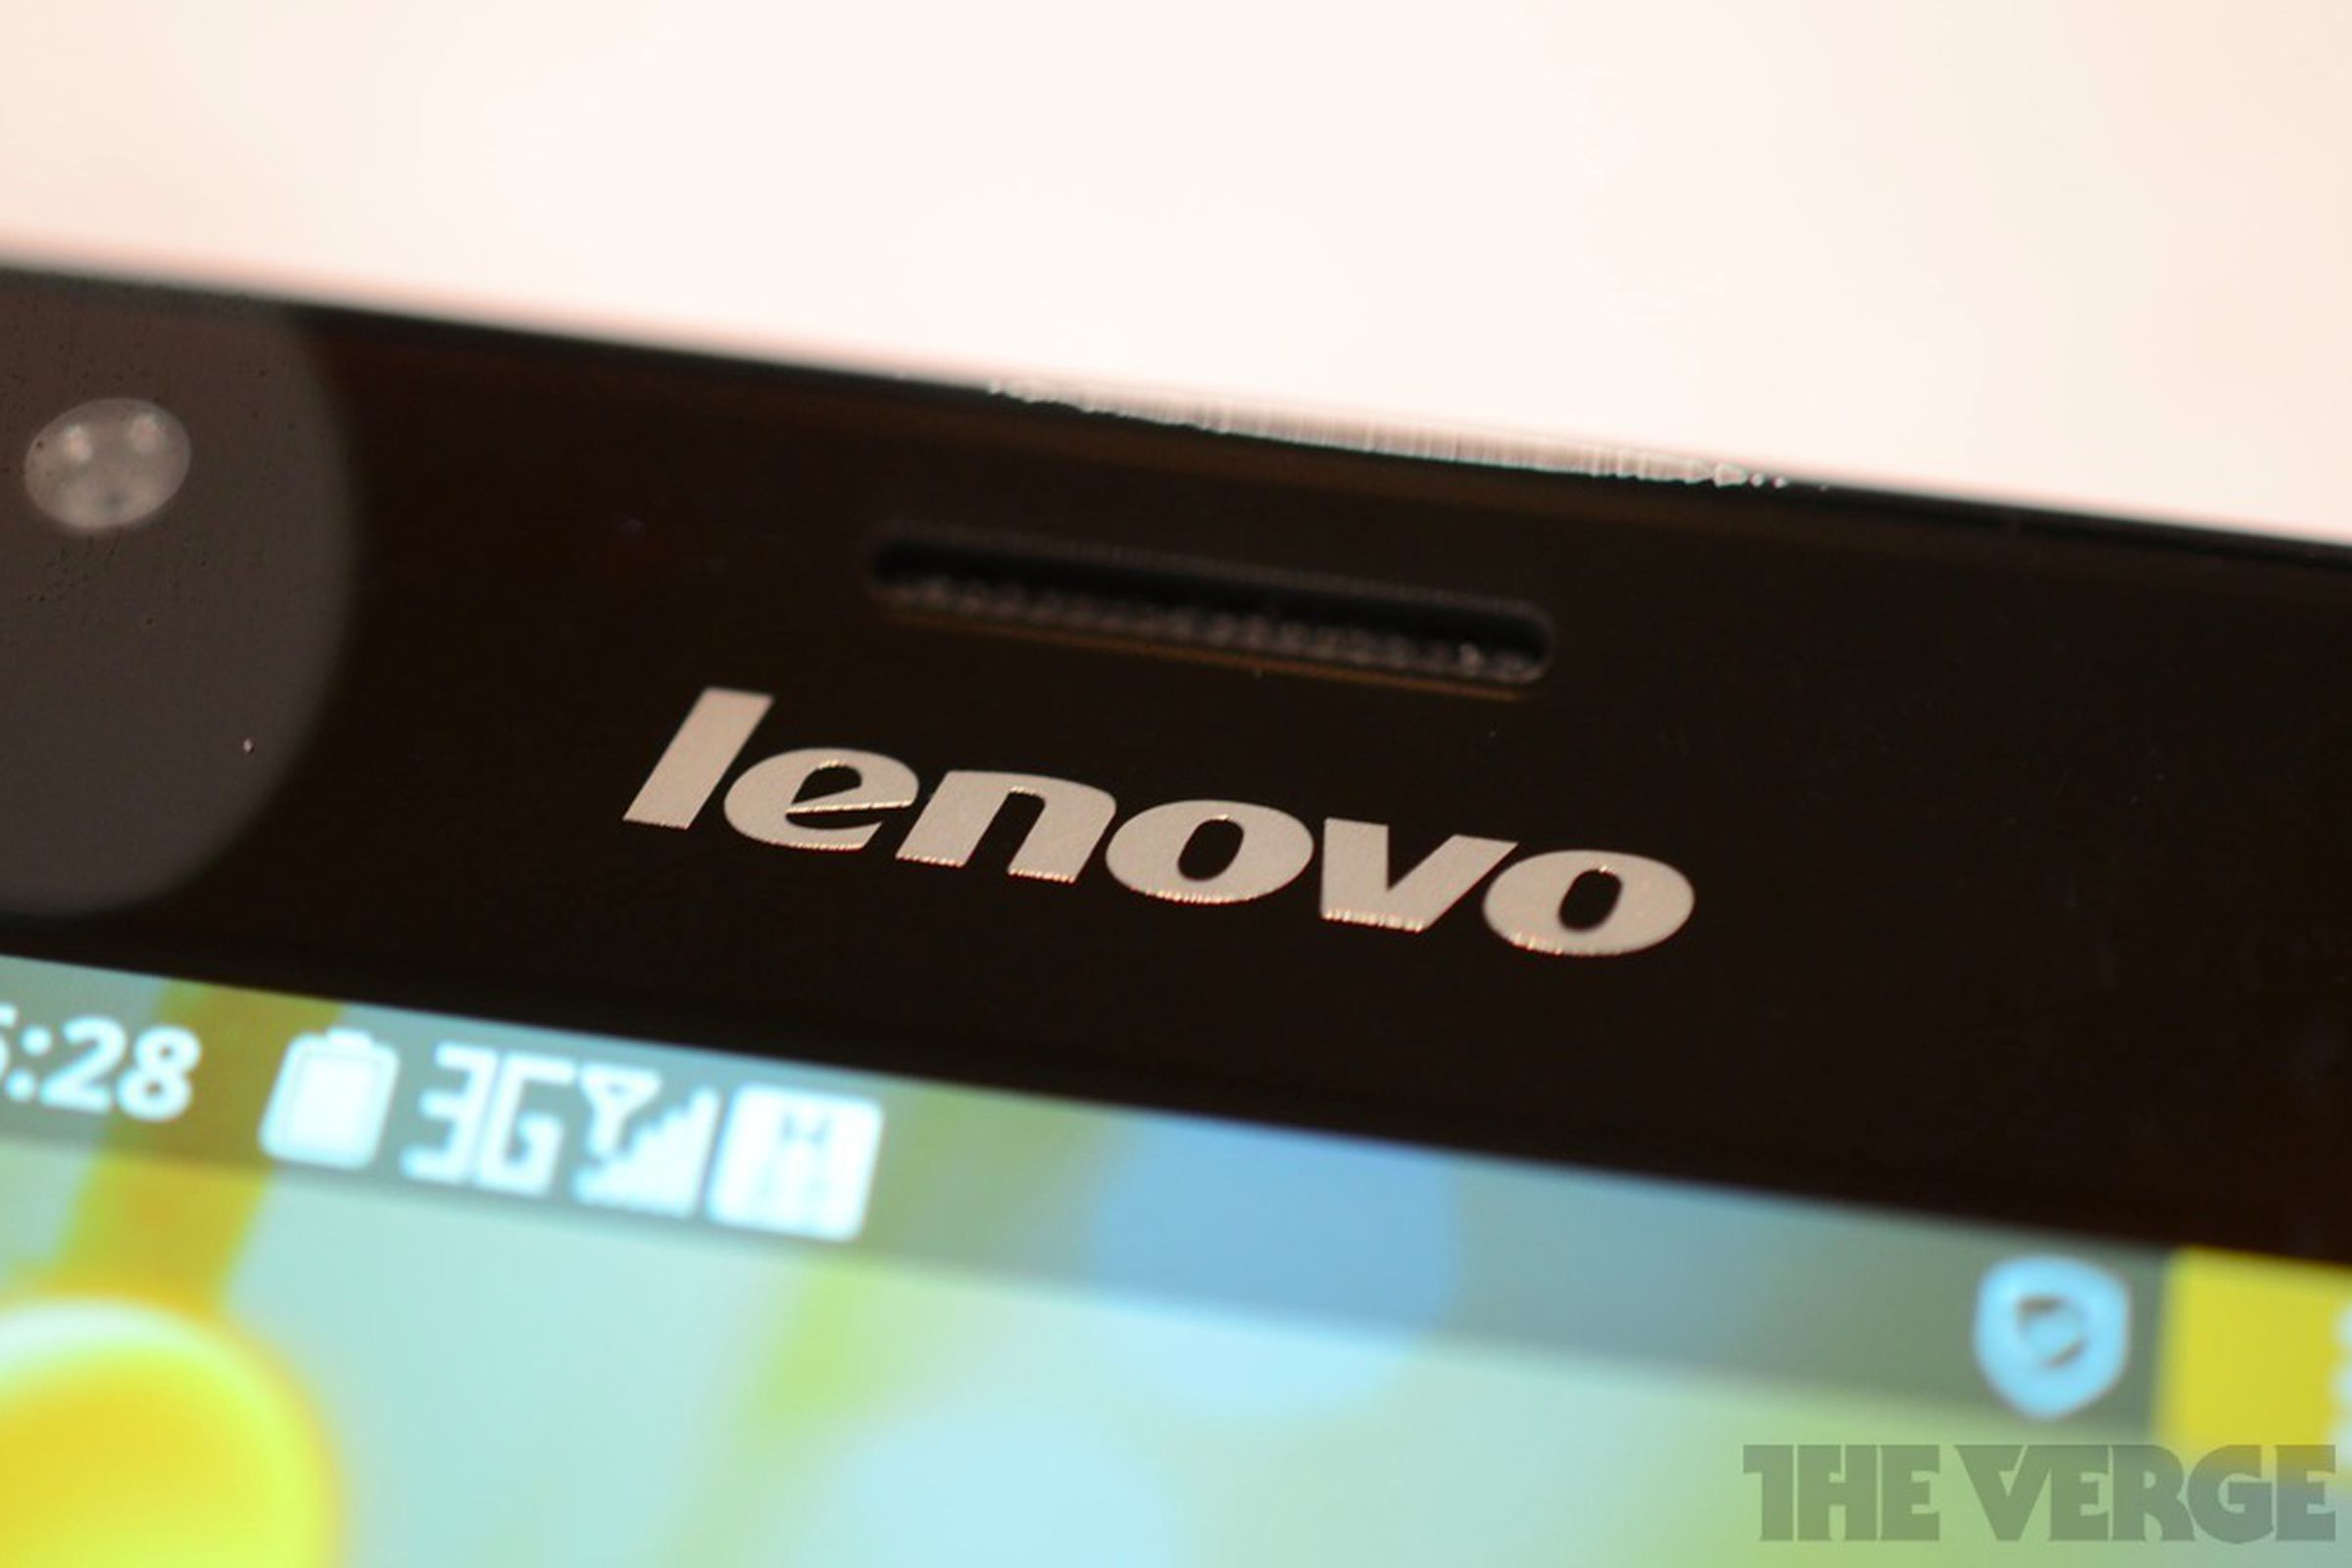 Gallery Photo: Lenovo K800 Intel Medfield phone hands-on pictures